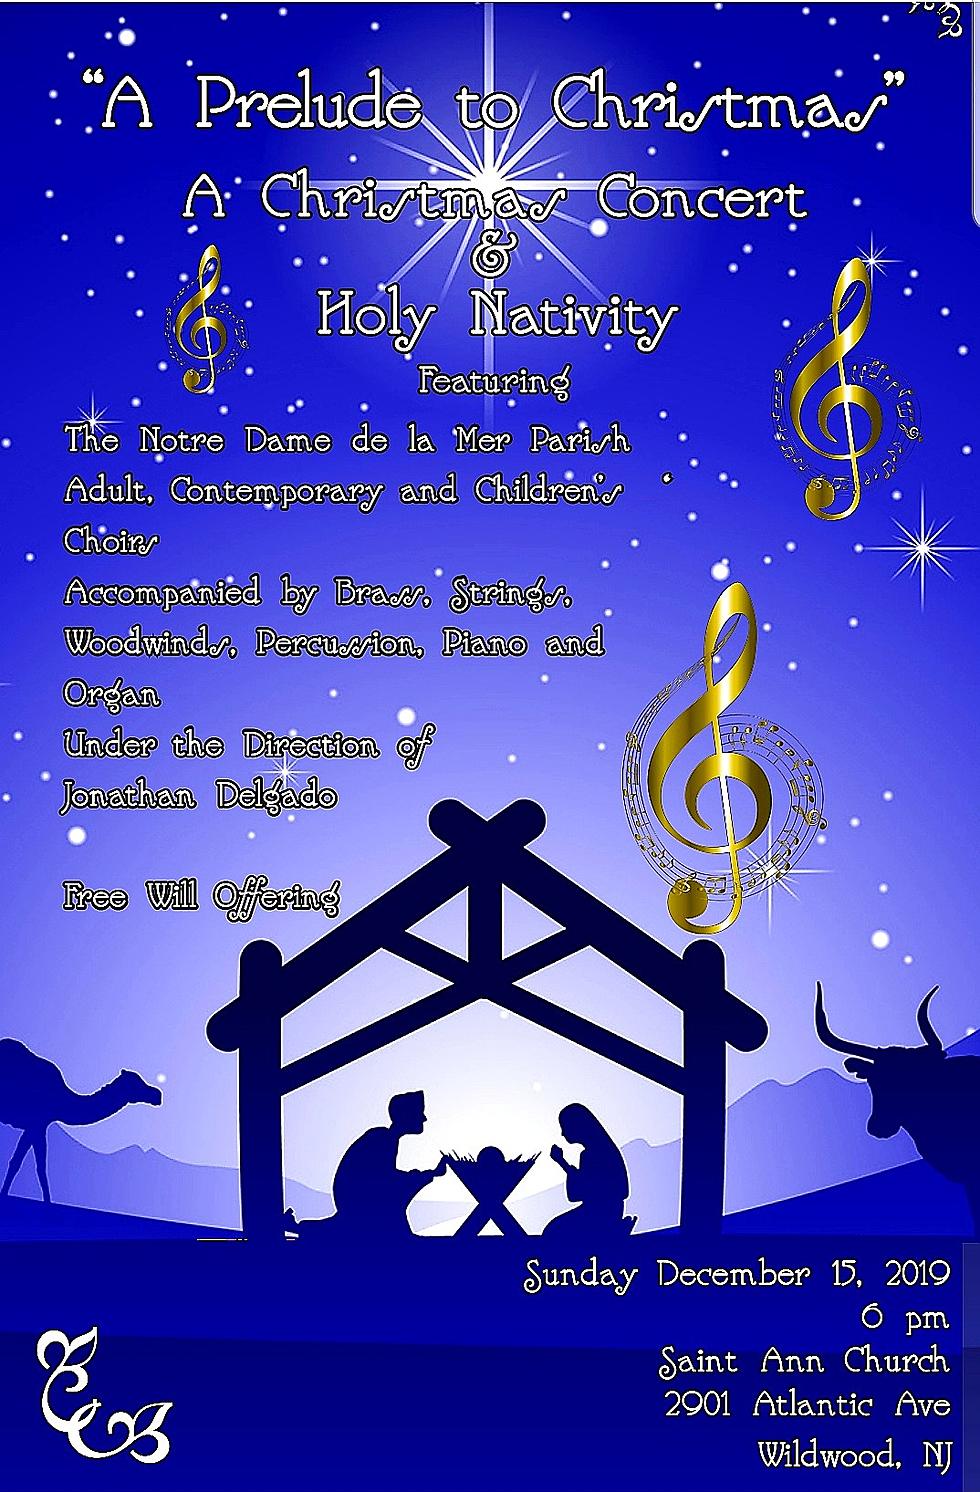 Prelude to Christmas: Christmas Concert and Holy Nativity